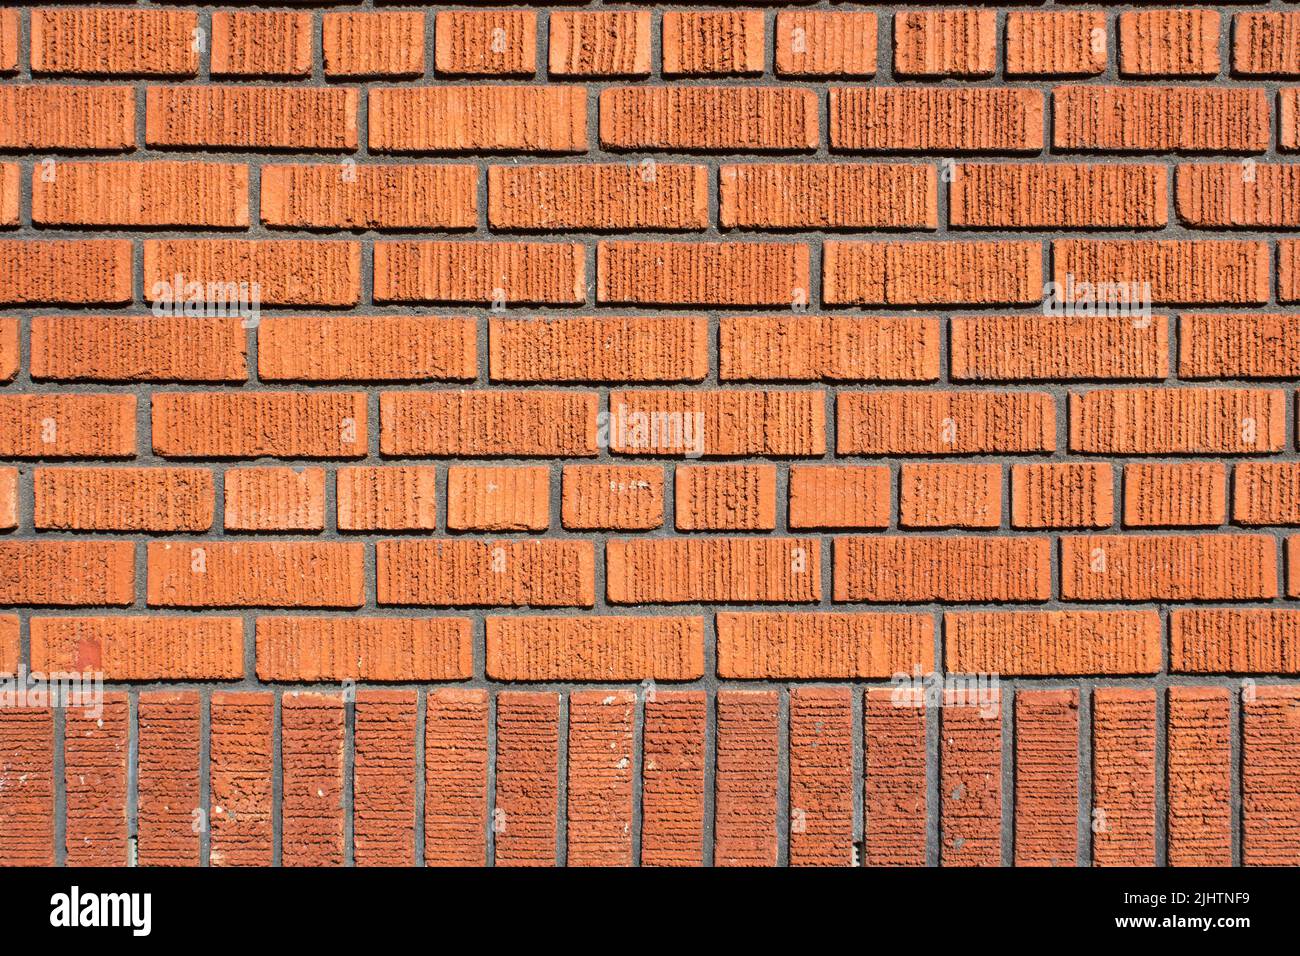 Old Bright, Red And Orange Brick Wall Texture. Strong Brickwork Seamless. Shabby Building Facade. Perfect Stonework Backdrop. Stock Photo